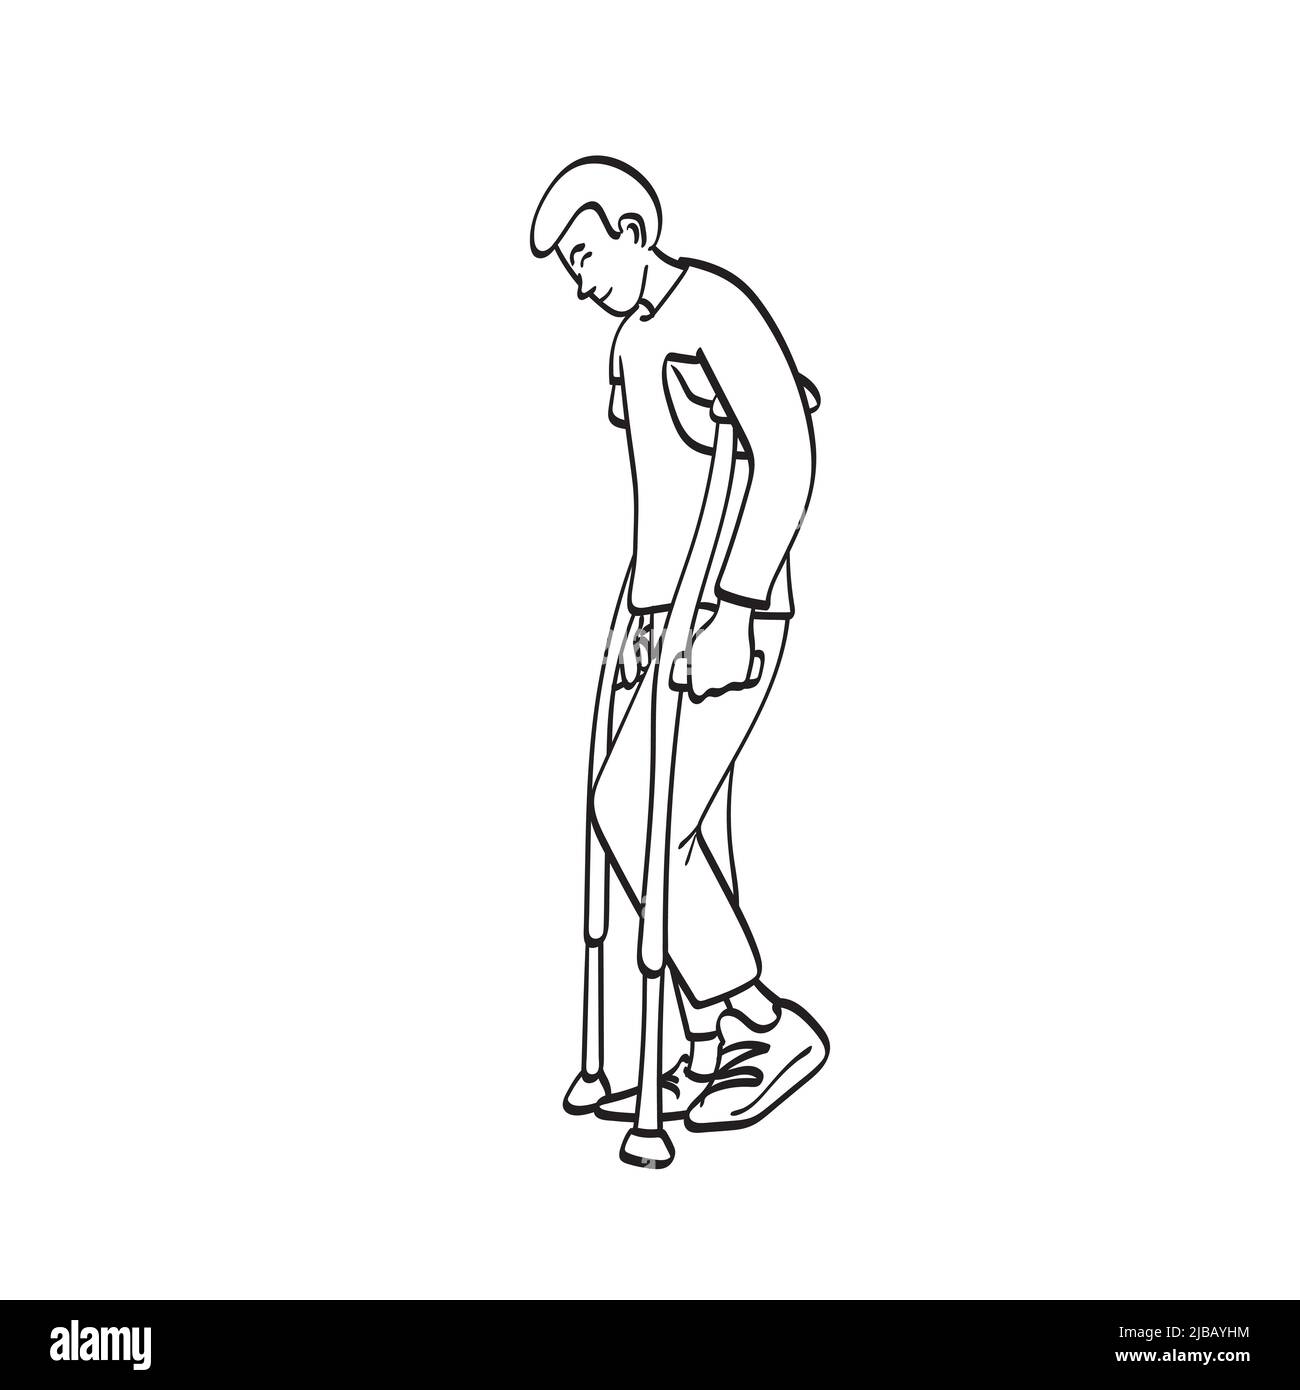 standing male patient with crutches illustration vector hand drawn isolated on white background line art. Stock Vector